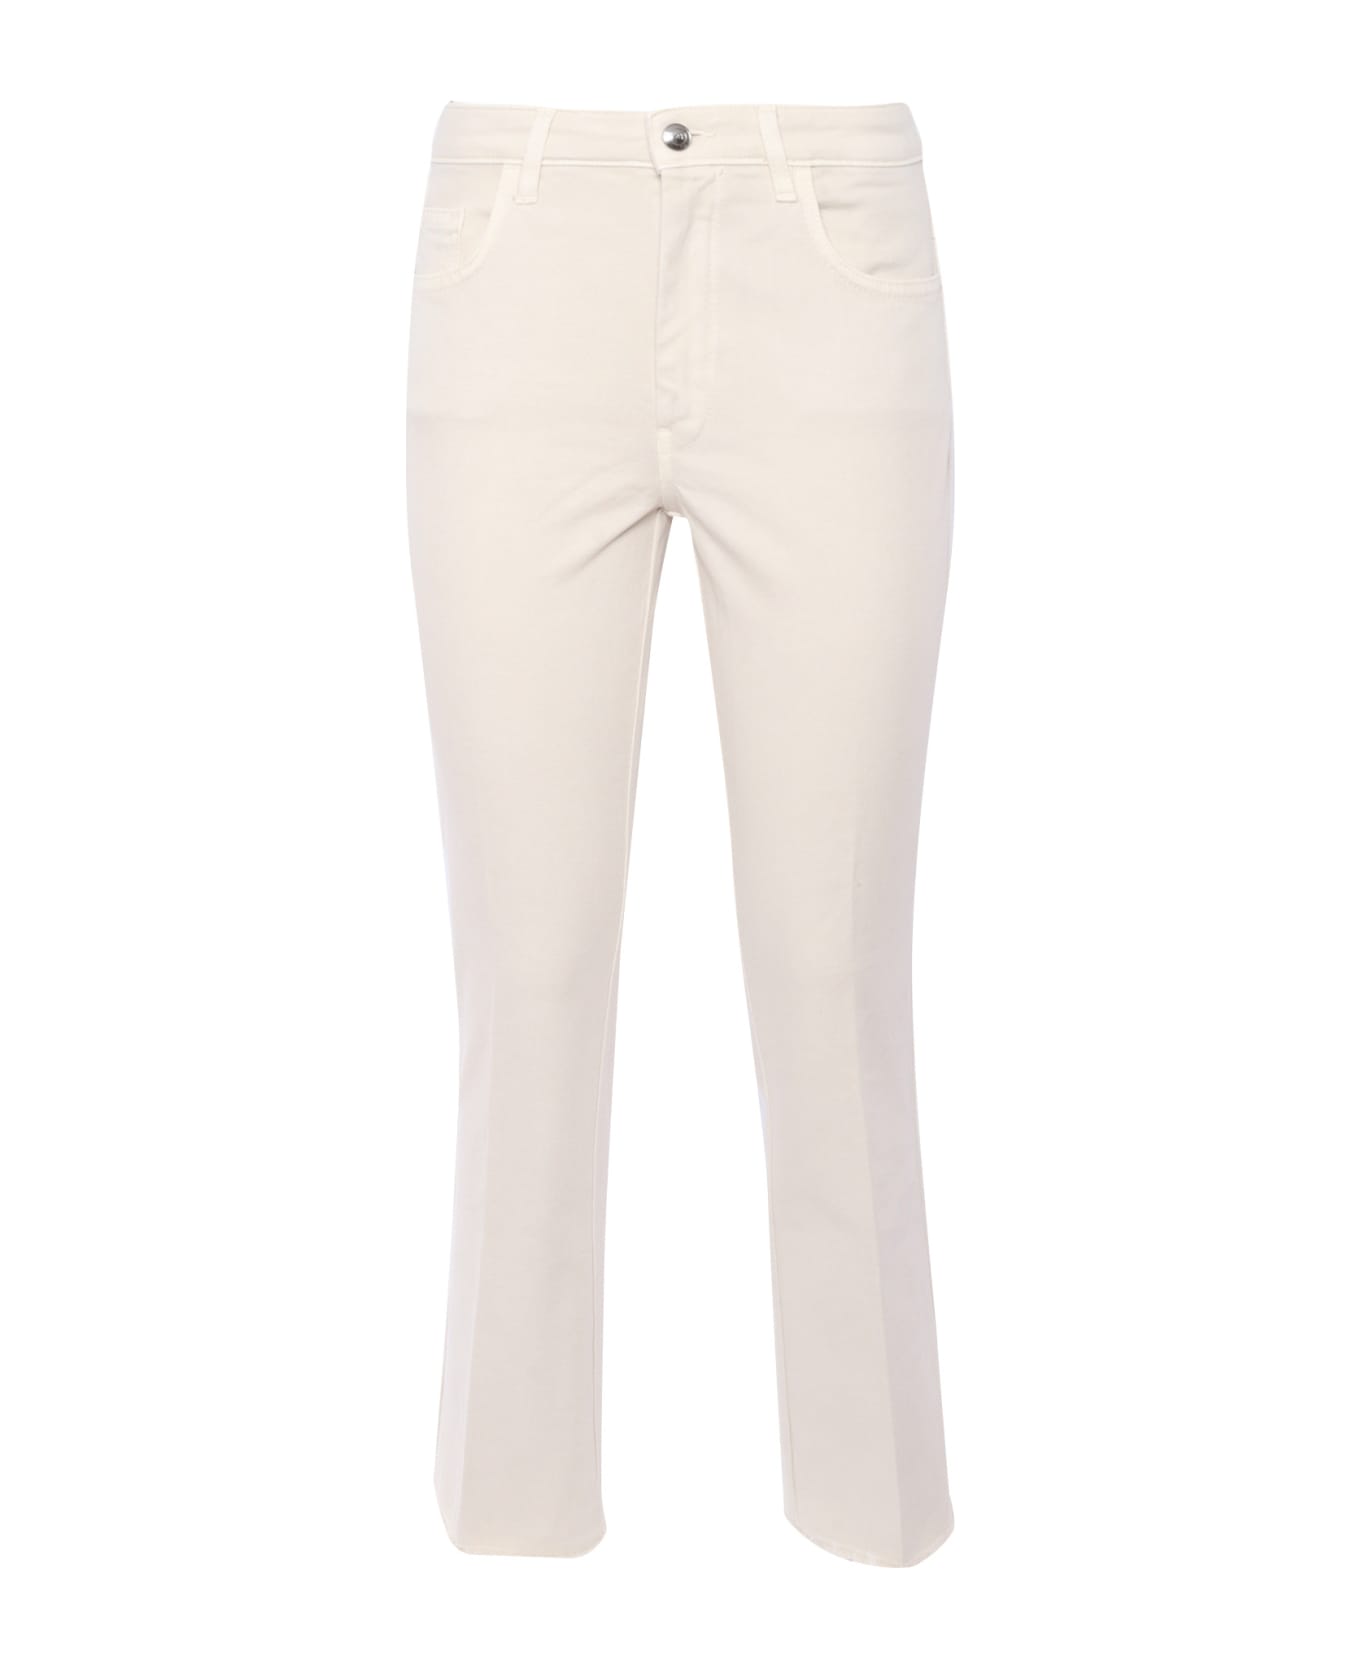 Fay Cream Colored Trousers - WHITE ボトムス